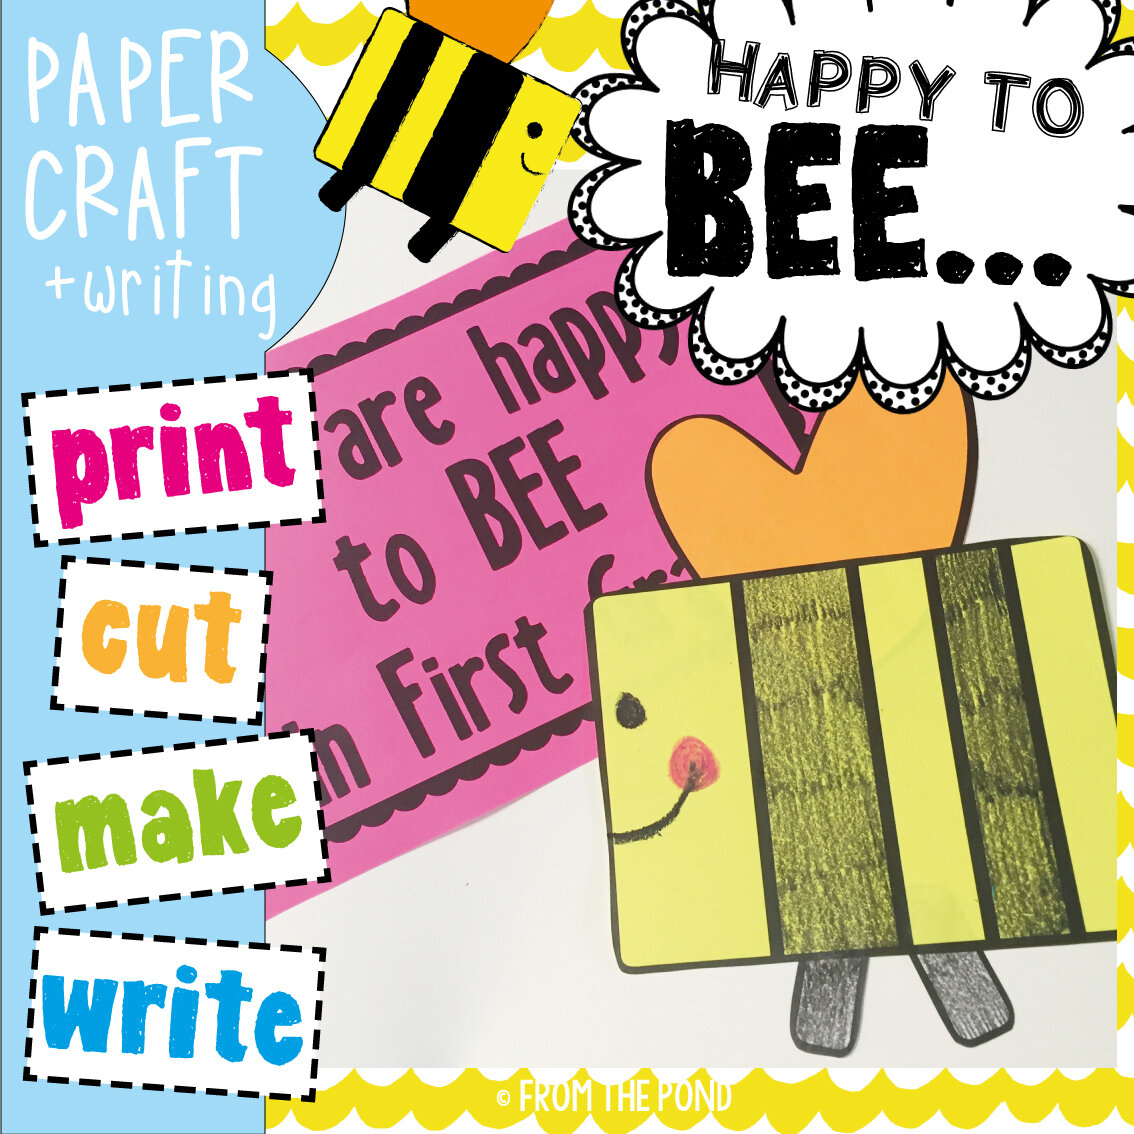 Happy to Bee Craft